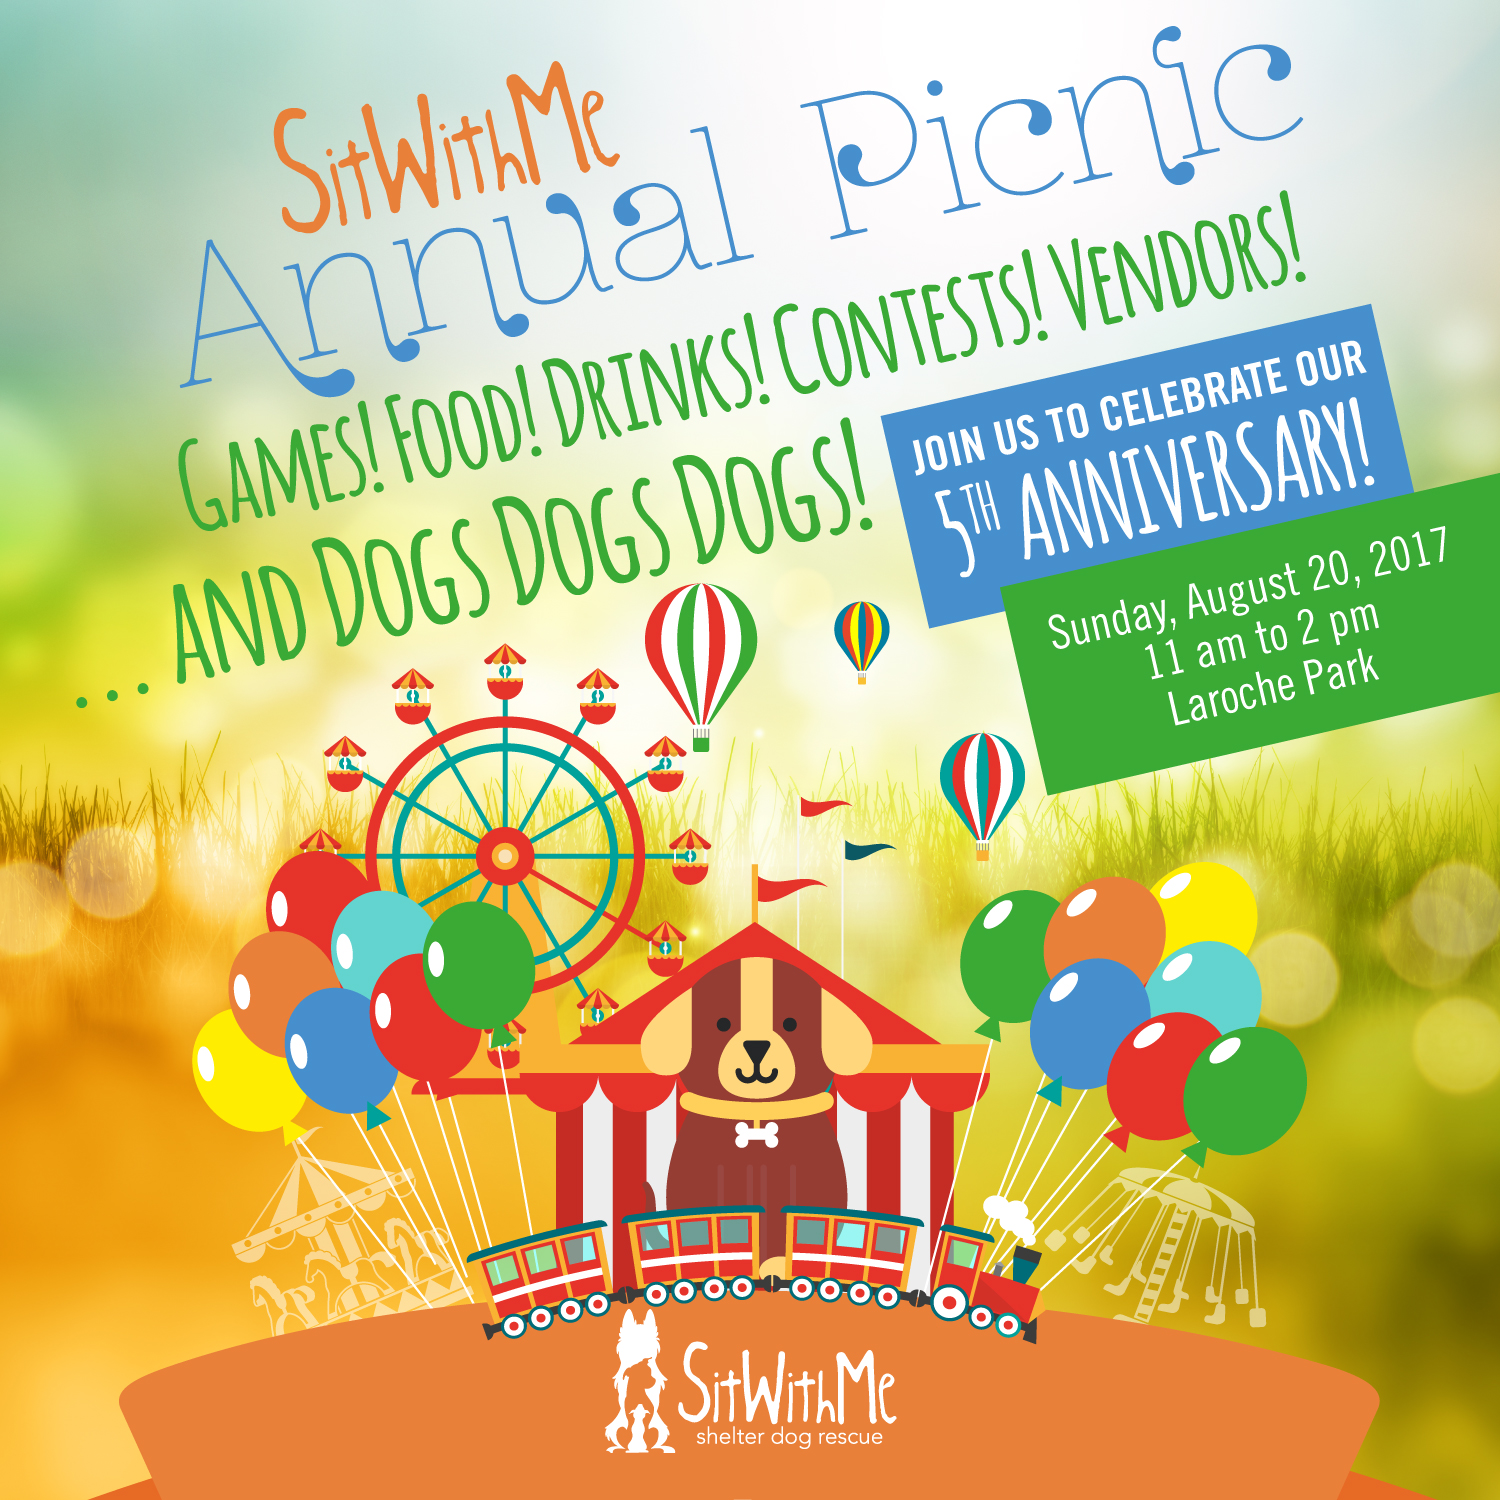 Sit With Me Annual Picnic. Games! Food! Drinks! Contests! Vendors! and Dogs Dogs Dogs! Join us to celebrate our 5th Anniversary! Sunday, August 20, 2017. 11 am to 2 pm. Laroche Park.